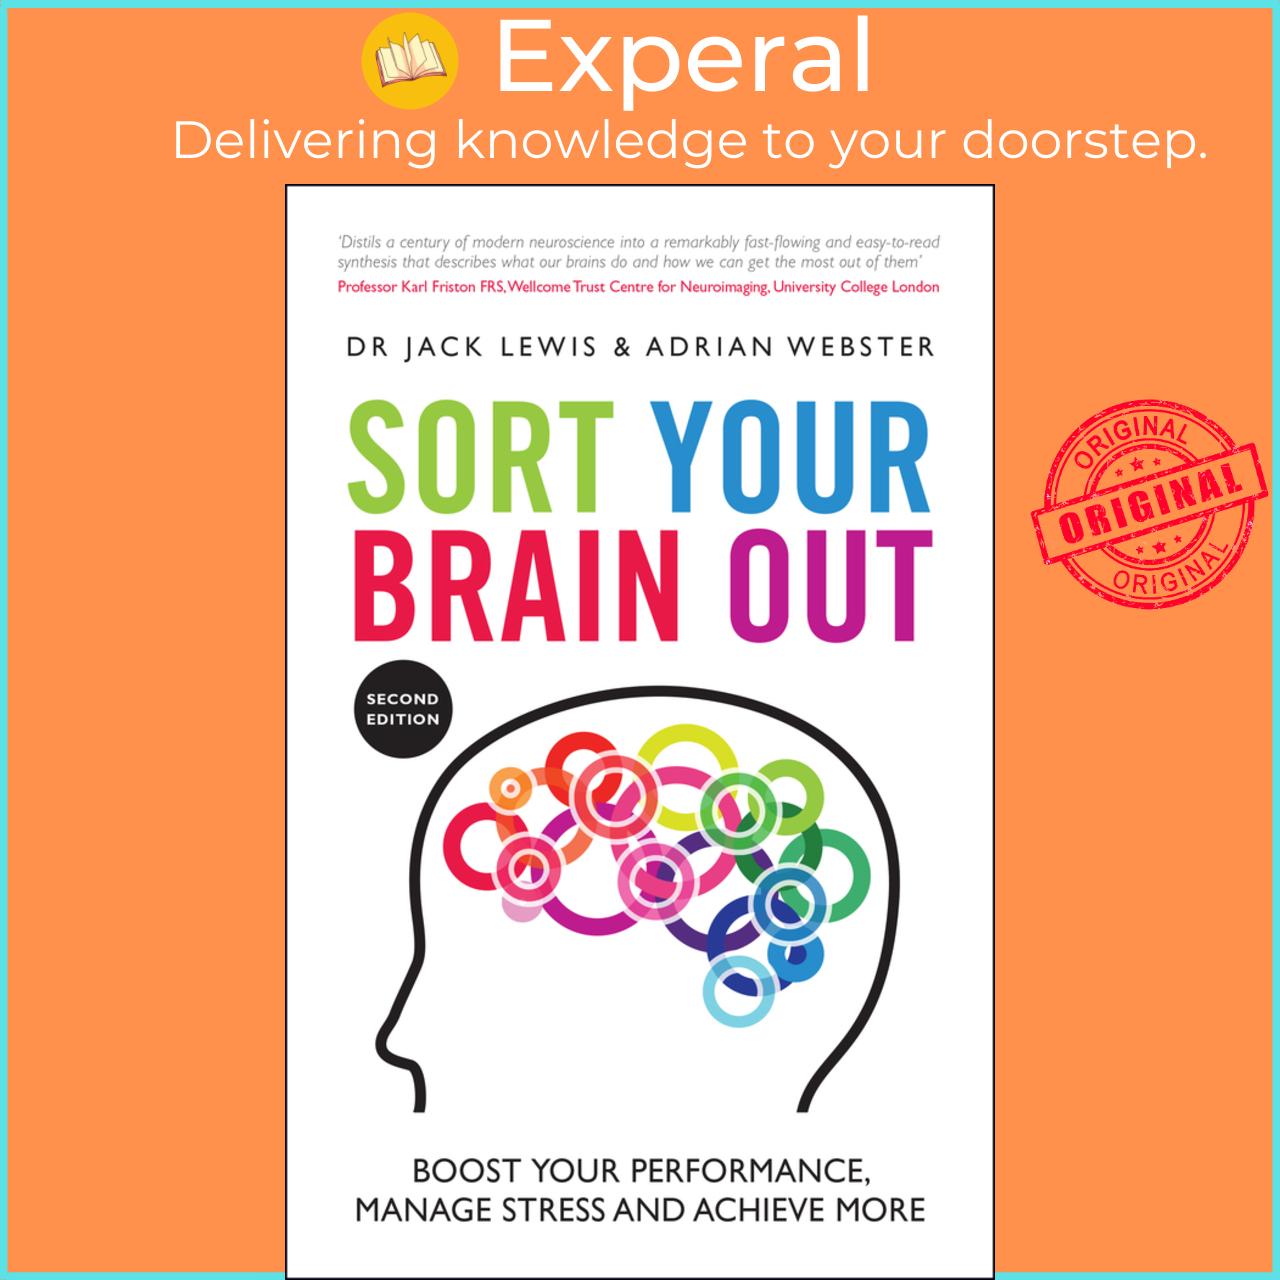 Sách - Sort Your Brain Out - Boost Your Performance, Manage Stress  by Jack Lewis Adrian Webster (US edition, paperback)